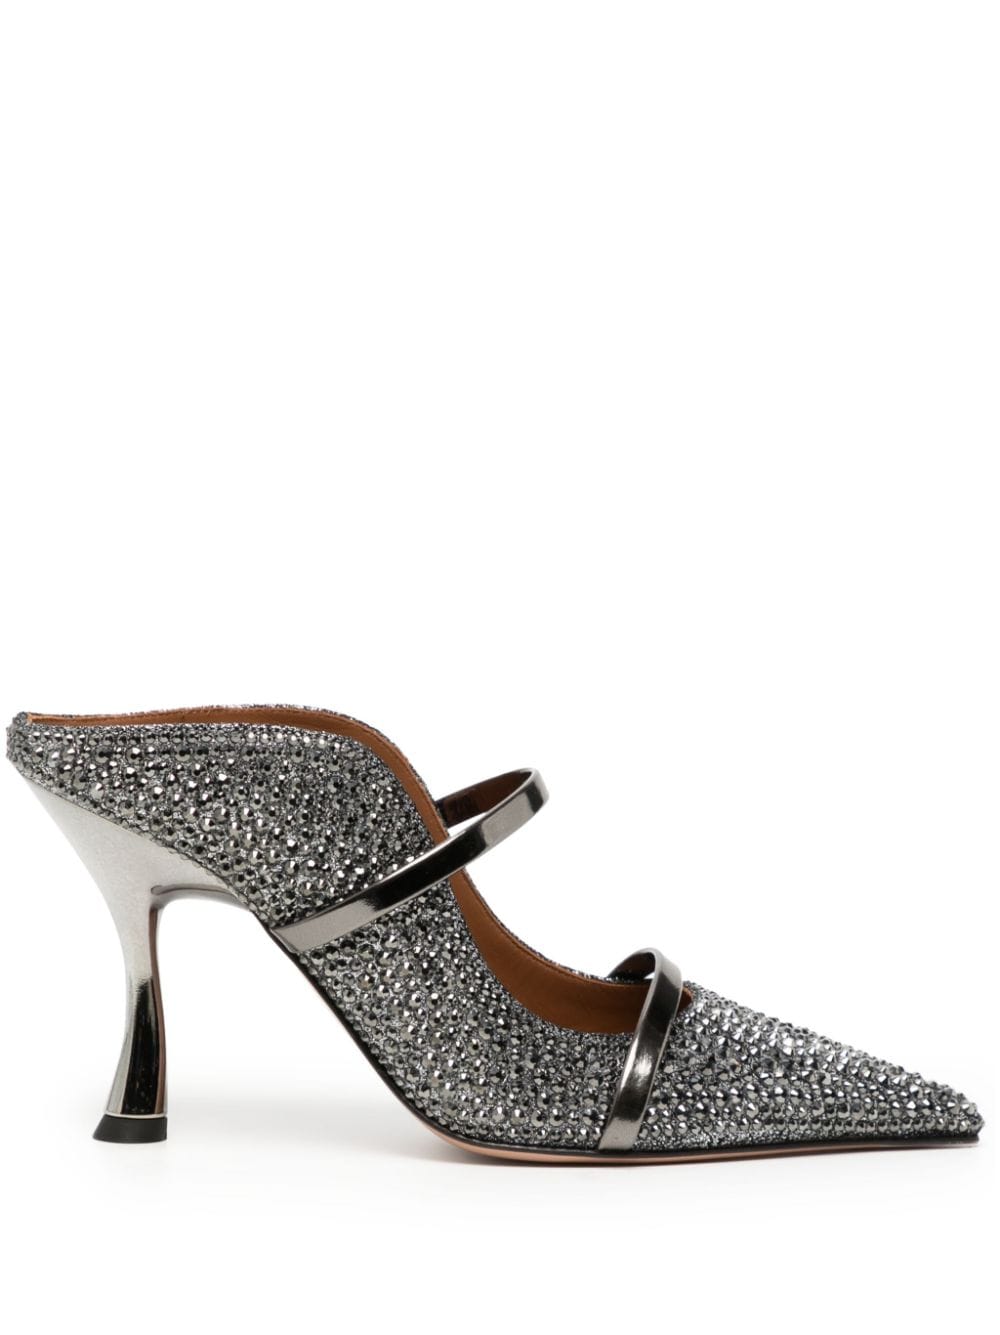 Malone Souliers Maureen 90mm studded pumps - Black von Malone Souliers